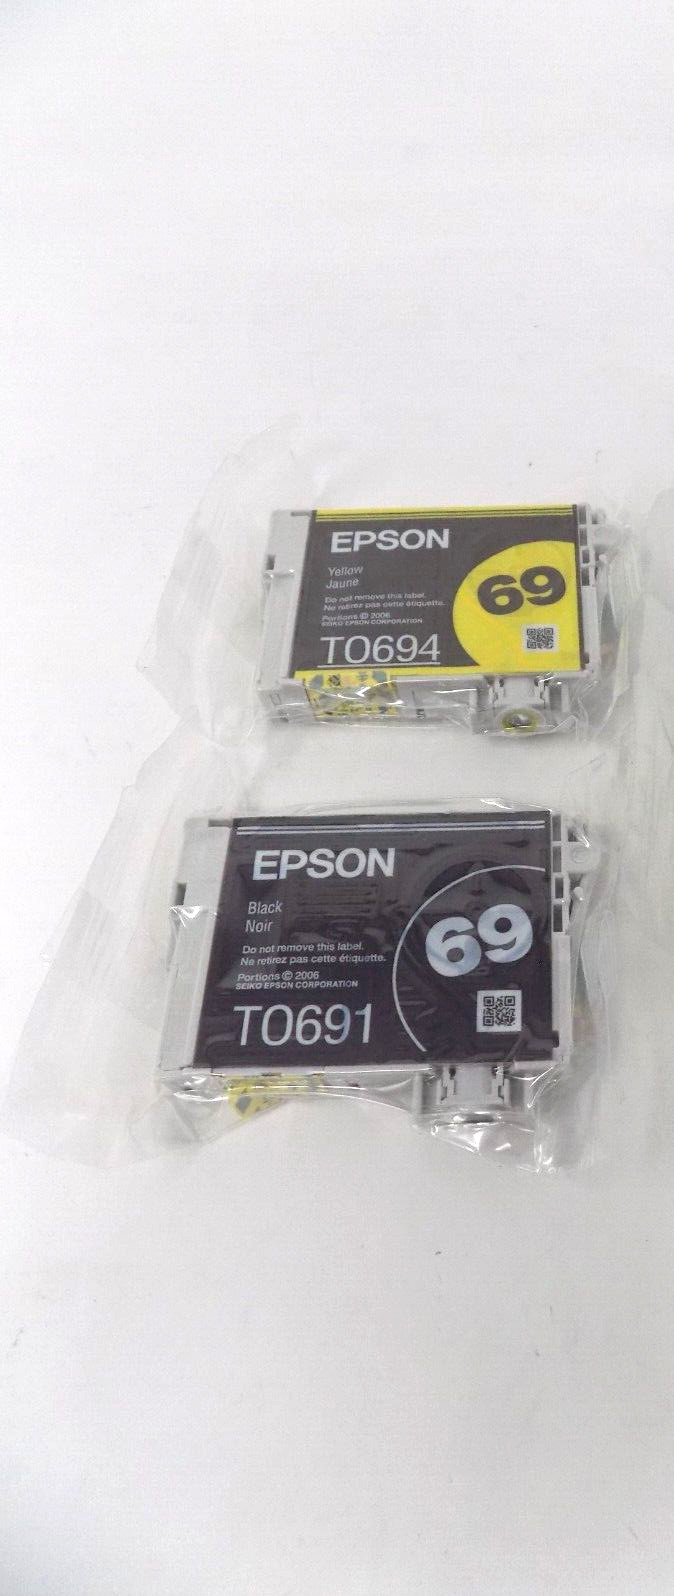 Genuine Epson 69 Ink Cartridges Black + Yellow T0691 T0694 Sealed TWO FREE